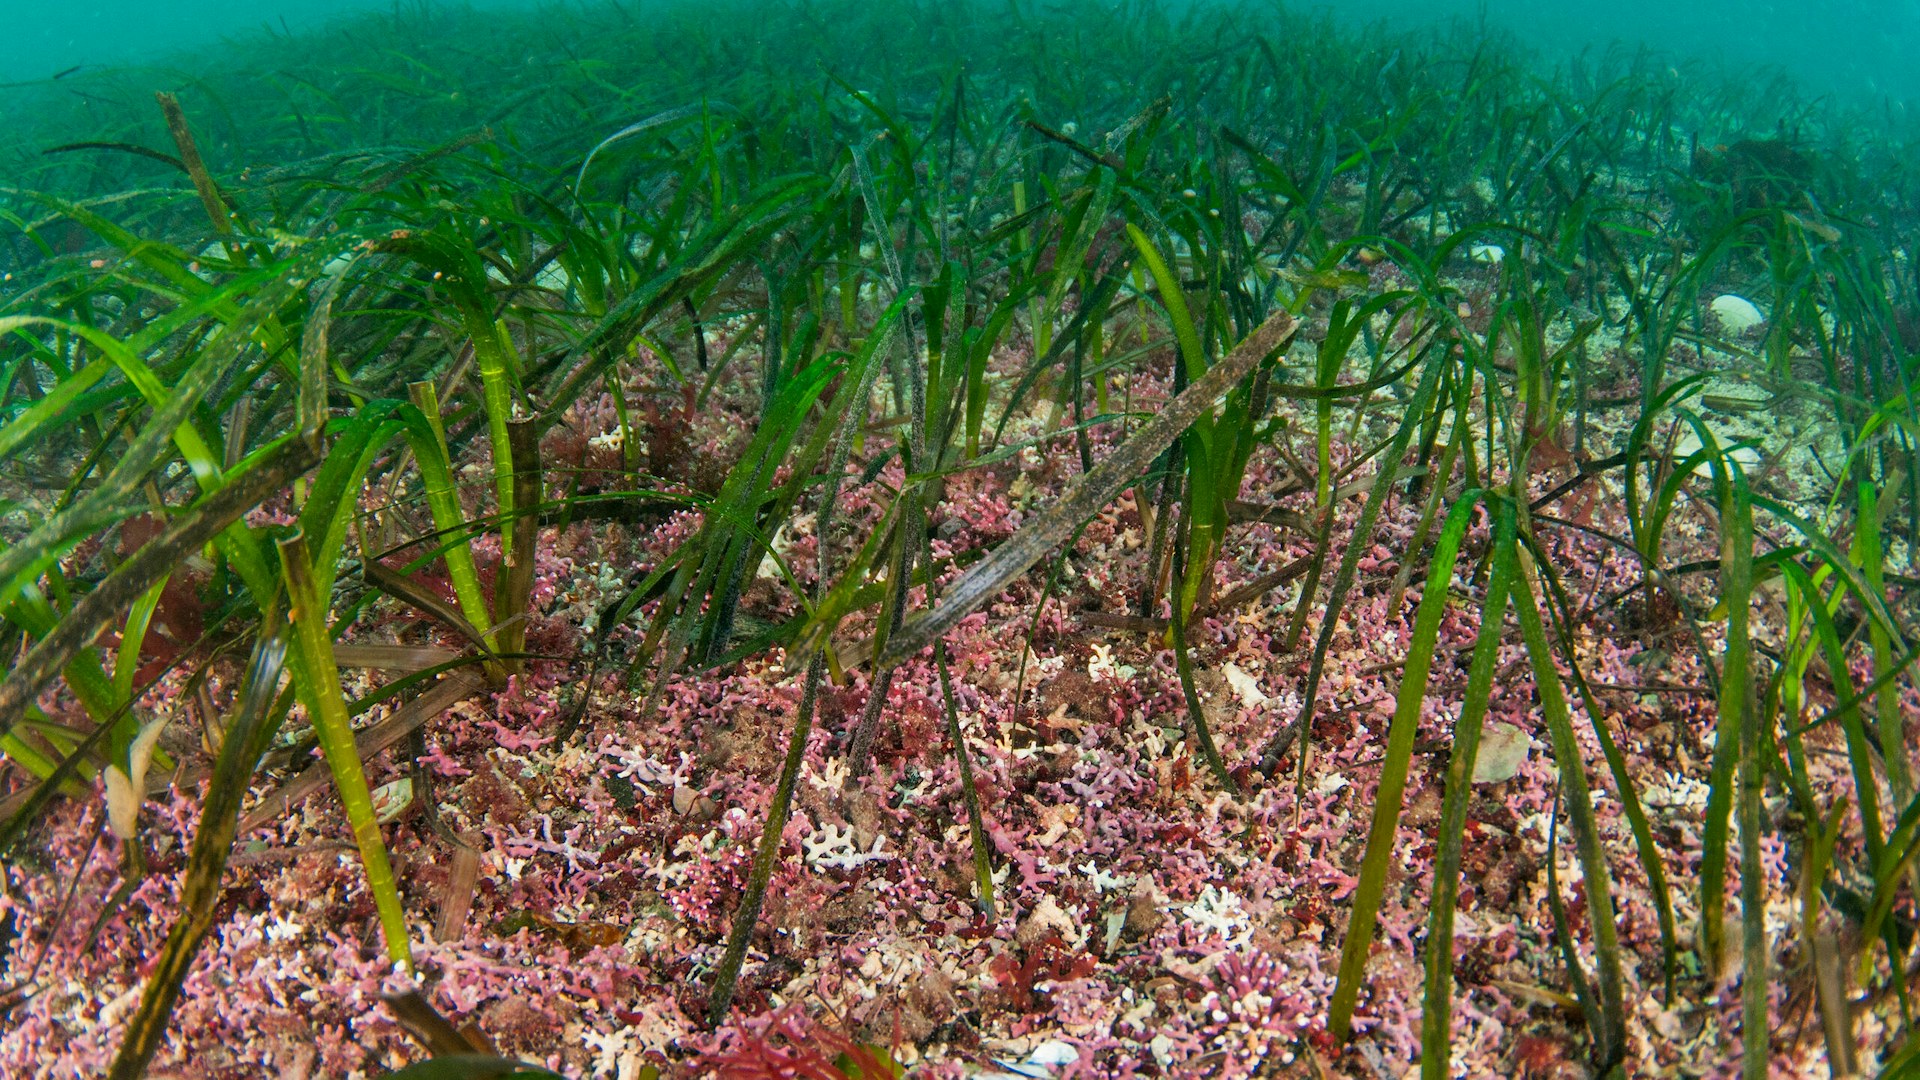 Maerl and Zostera marina seagrass beds, Orkney Isles